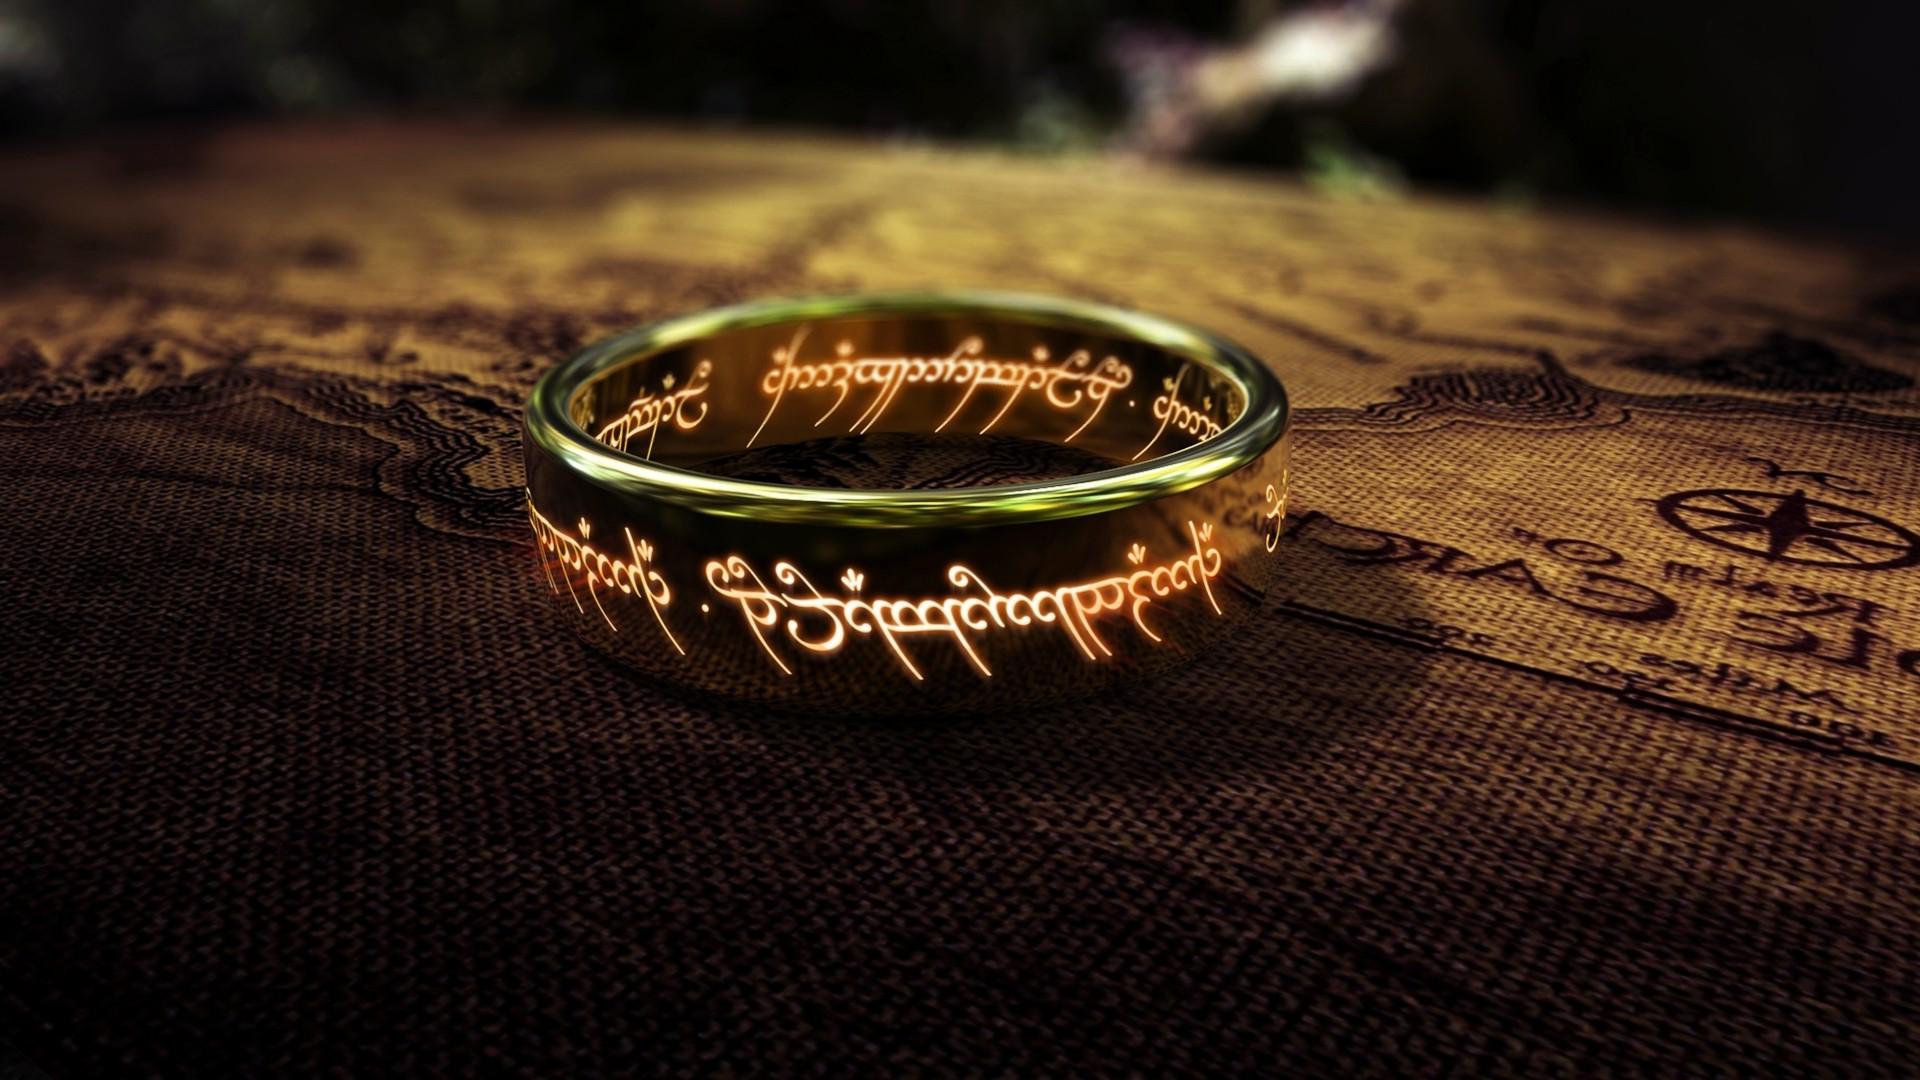 The Lord of the Rings: The Fellowship of the Ring Netflix